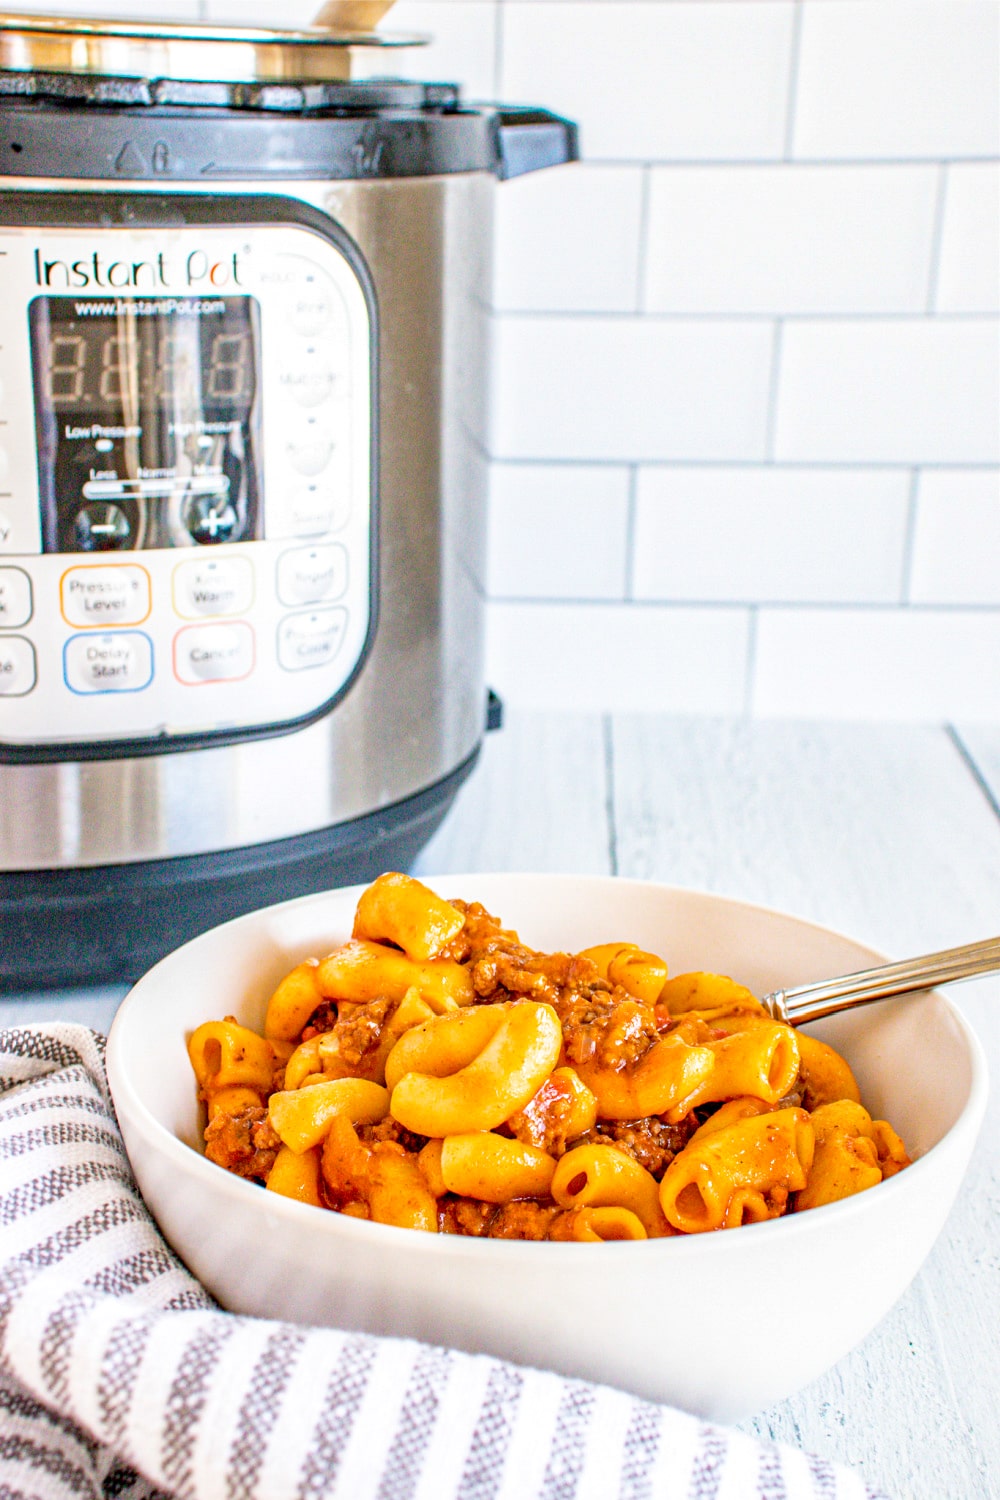 Instant Pot Goulash in a white bowl shown with Instant Pot 